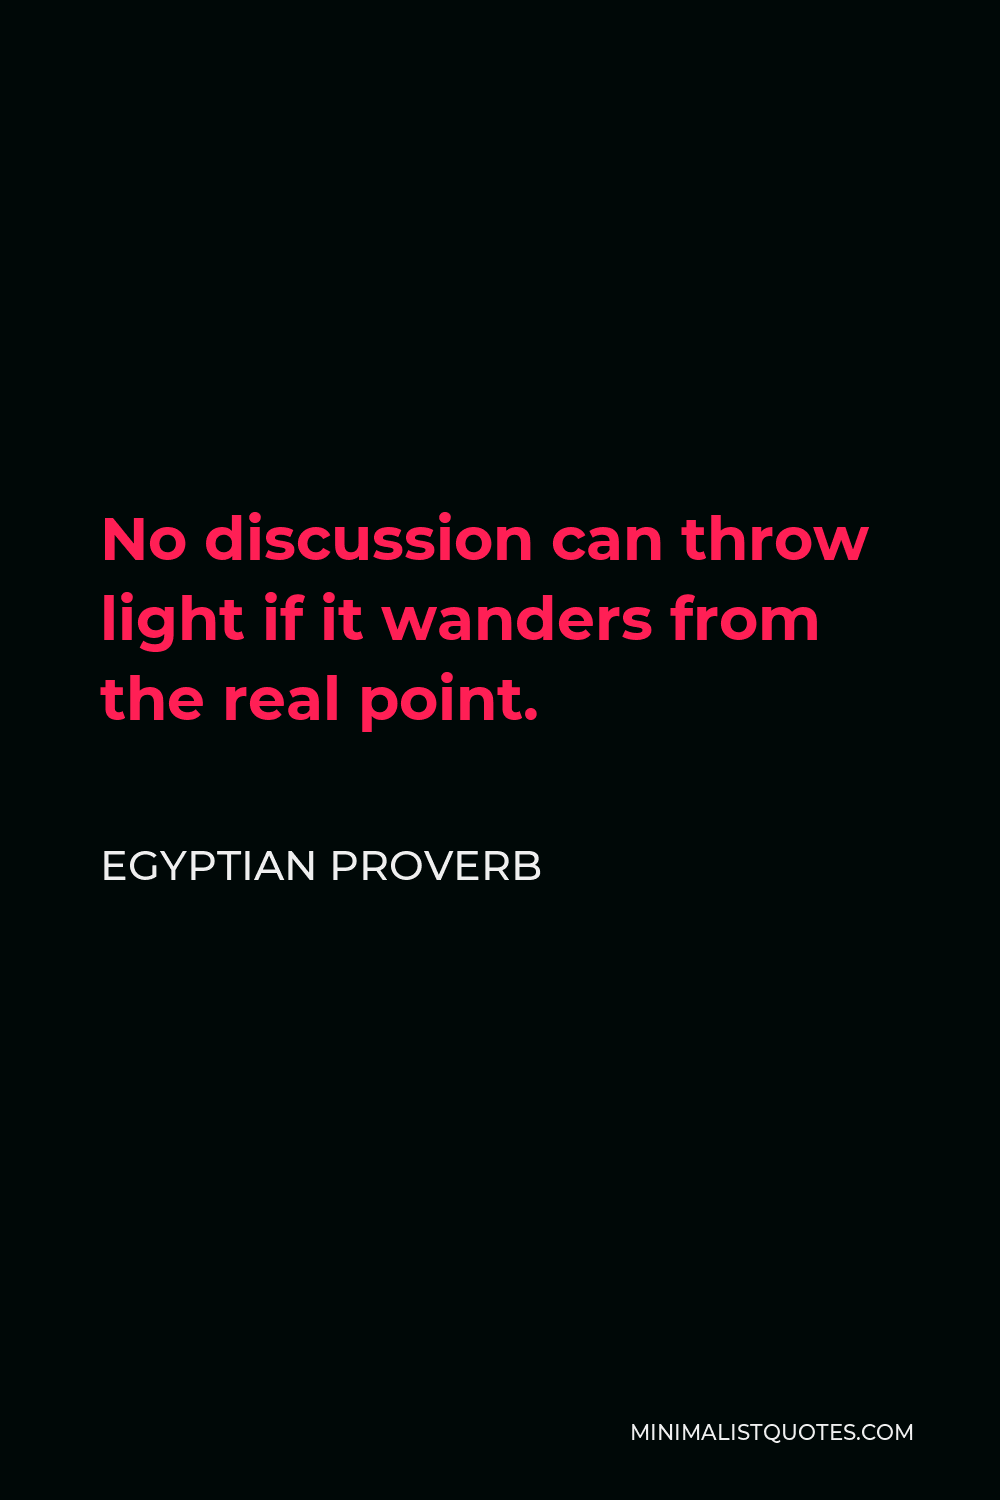 Egyptian Proverb Quote - No discussion can throw light if it wanders from the real point.